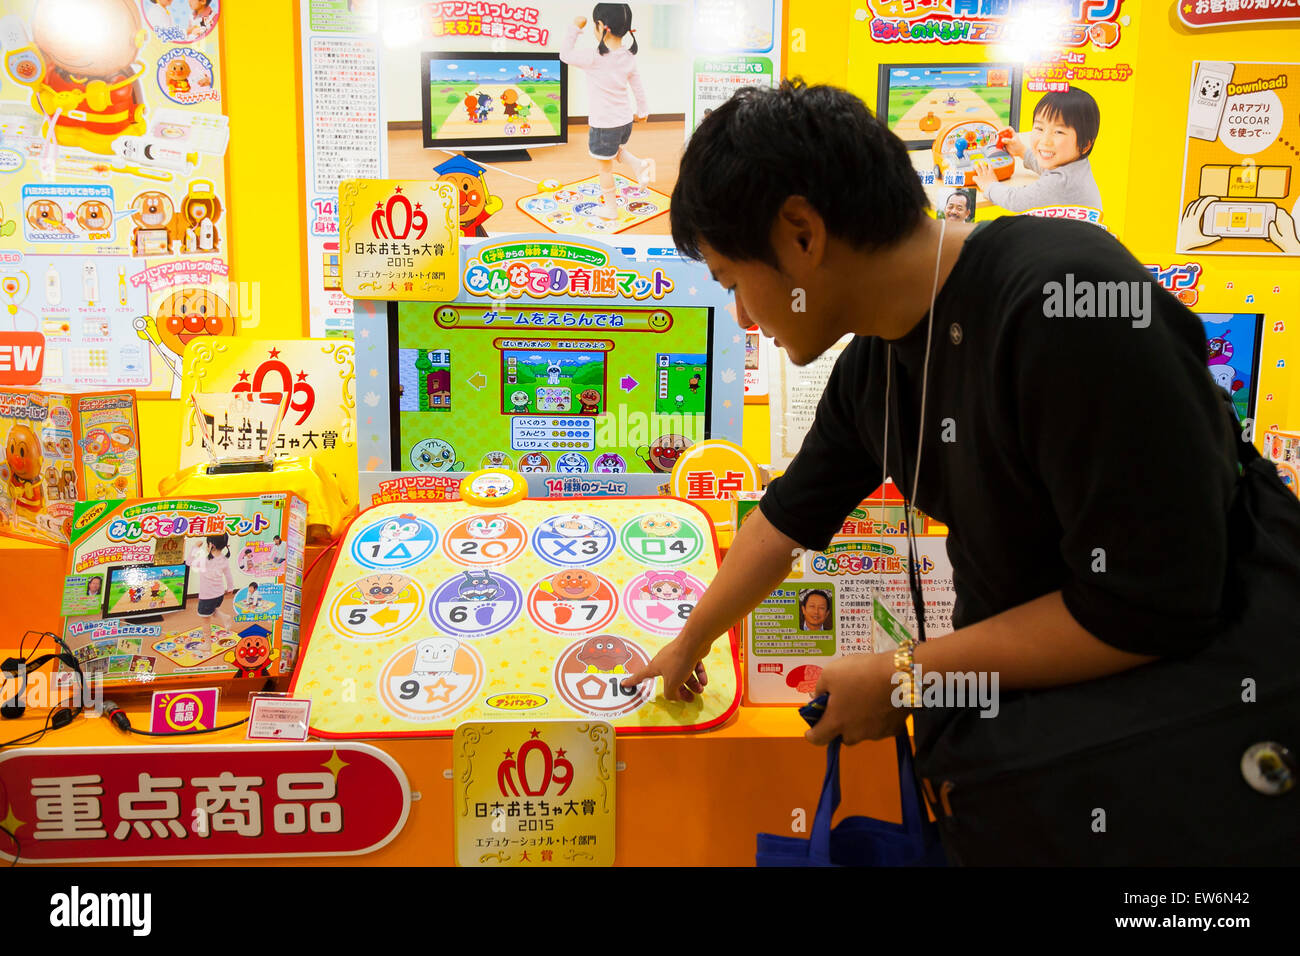 A man tries the products of JoyPalette Co., LTD. during the International Tokyo Toy Show 2015 in Tokyo Big Sight on June 18, 2015, Tokyo, Japan. Japan's largest trade show for toy makers attracts buyers and collectors by introducing the latest products from different toymakers from Japan and overseas. The toy fair showcases about 35,000 toys from 149 domestic and foreign companies and is held over four days. © Rodrigo Reyes Marin/AFLO/Alamy Live News Stock Photo